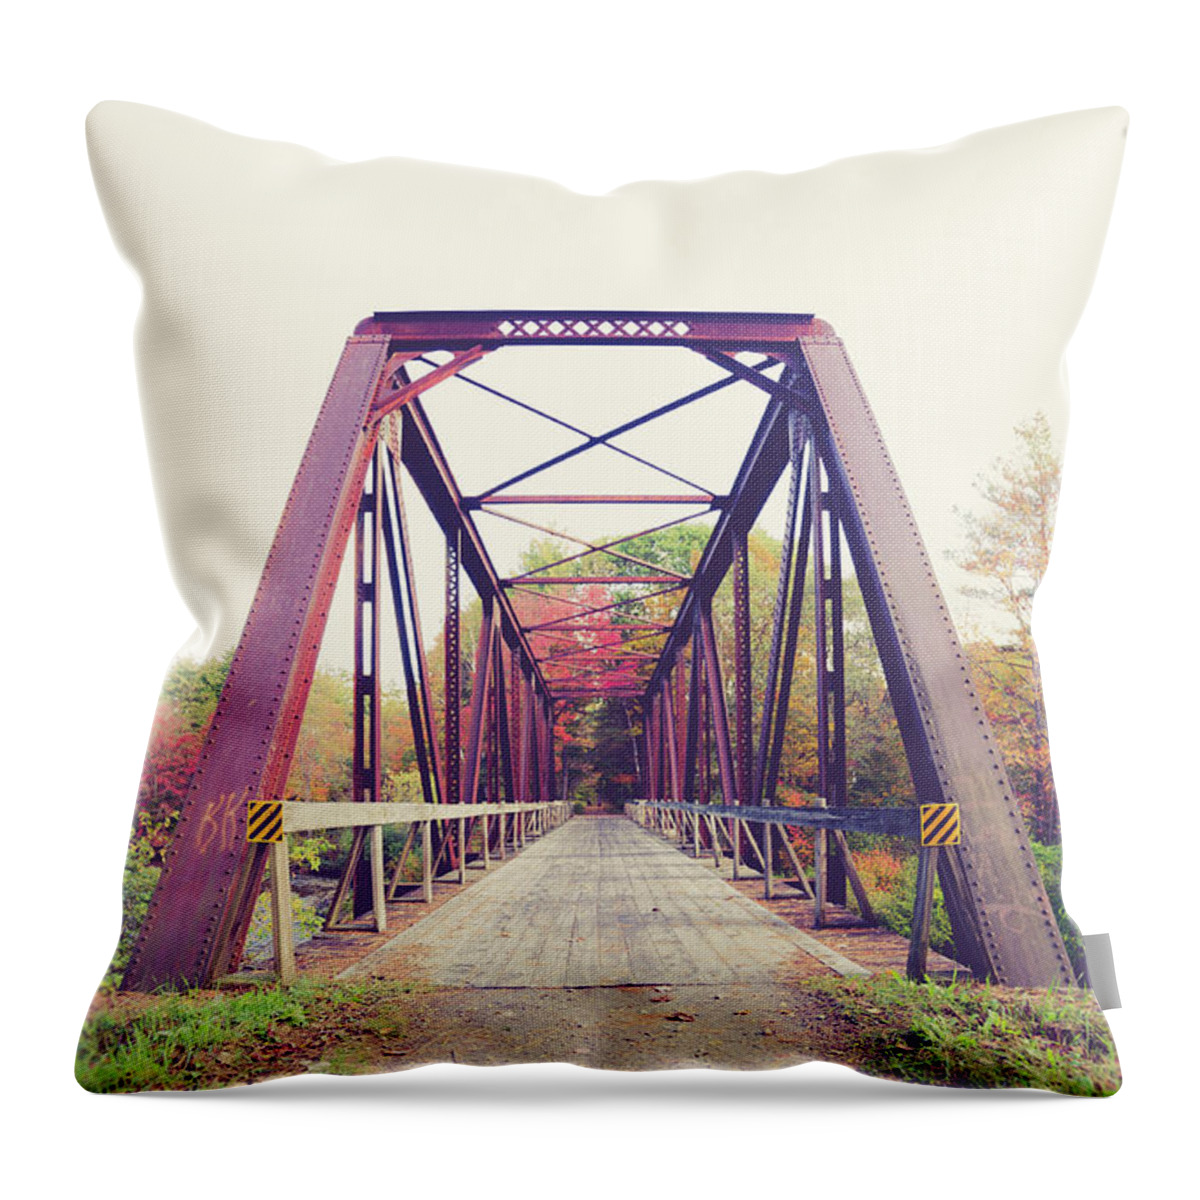 Rusty Throw Pillow featuring the photograph Old Train Bridge Newport New Hampshire by Edward Fielding